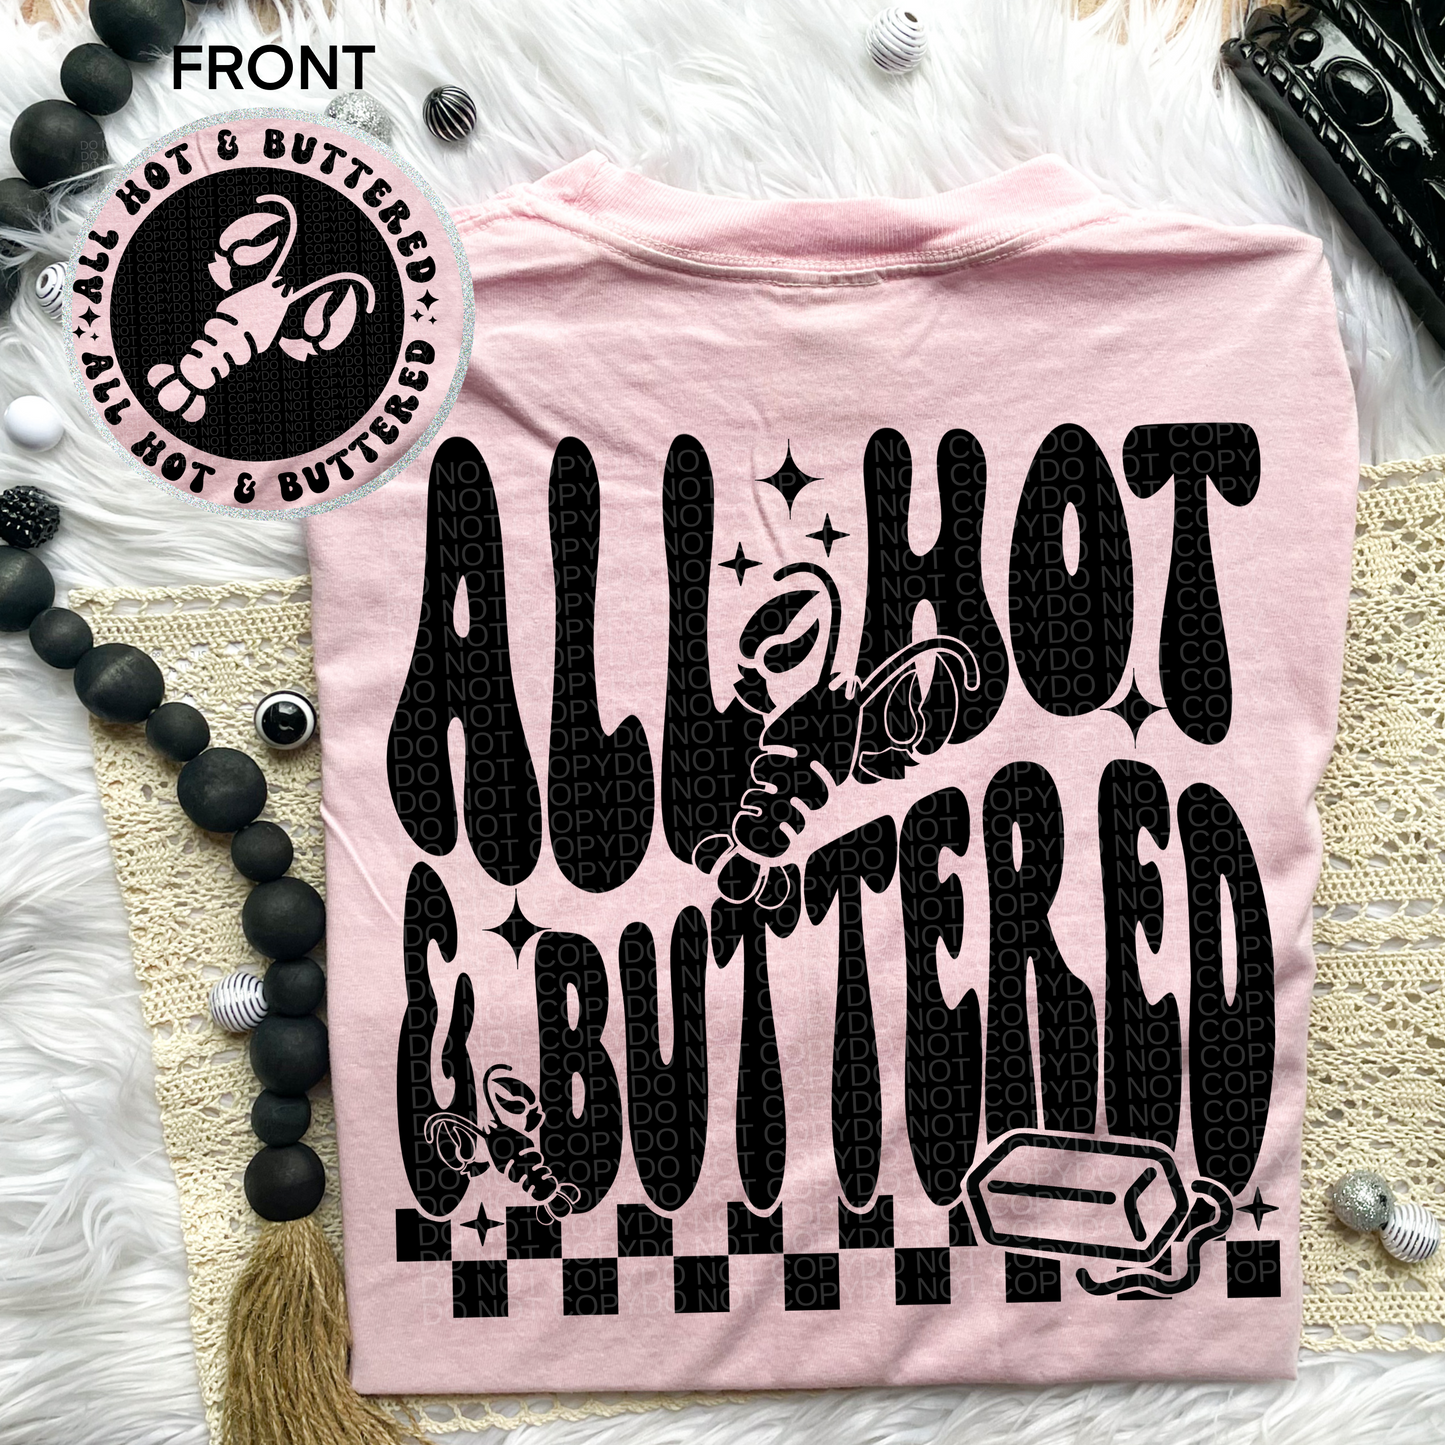 All Hot & Buttered (Crawfish edition) Comfort Colors Tee